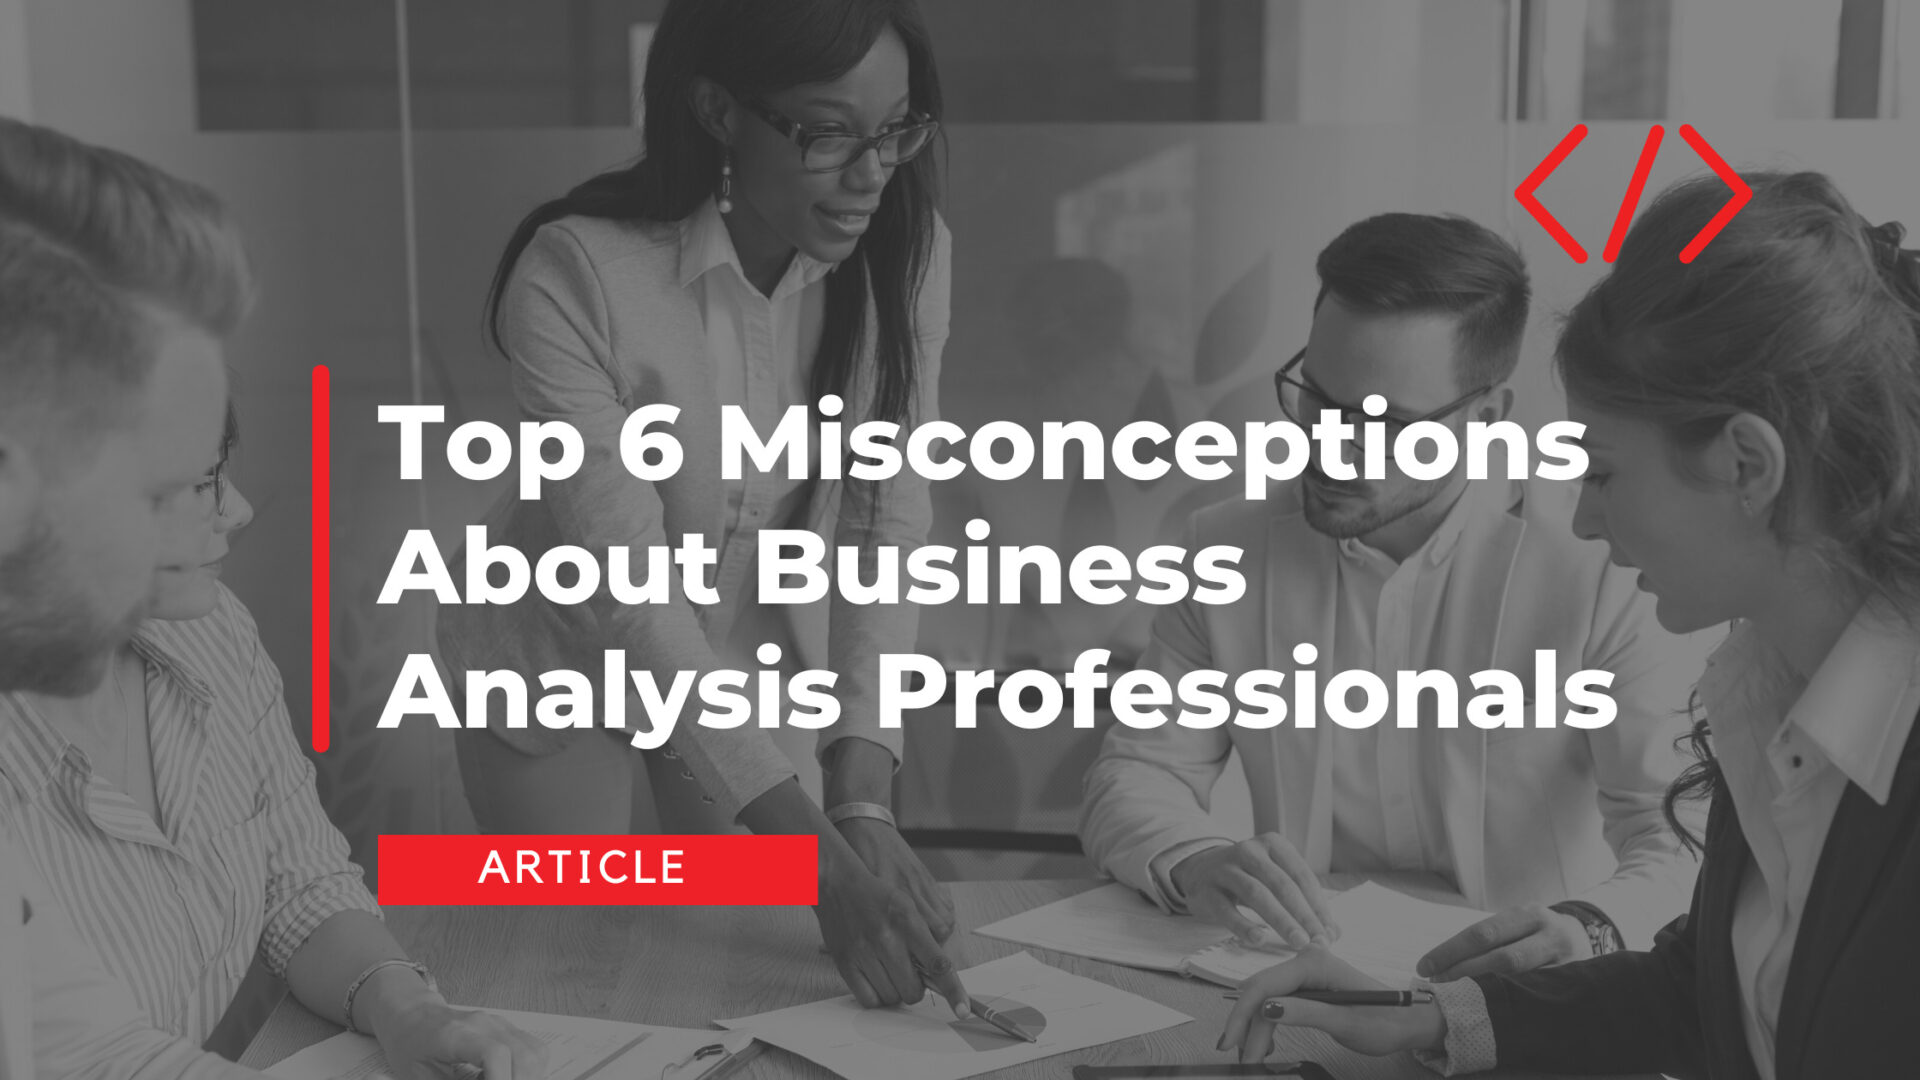 Top 6 Misconceptions About Business Analysis Professionals